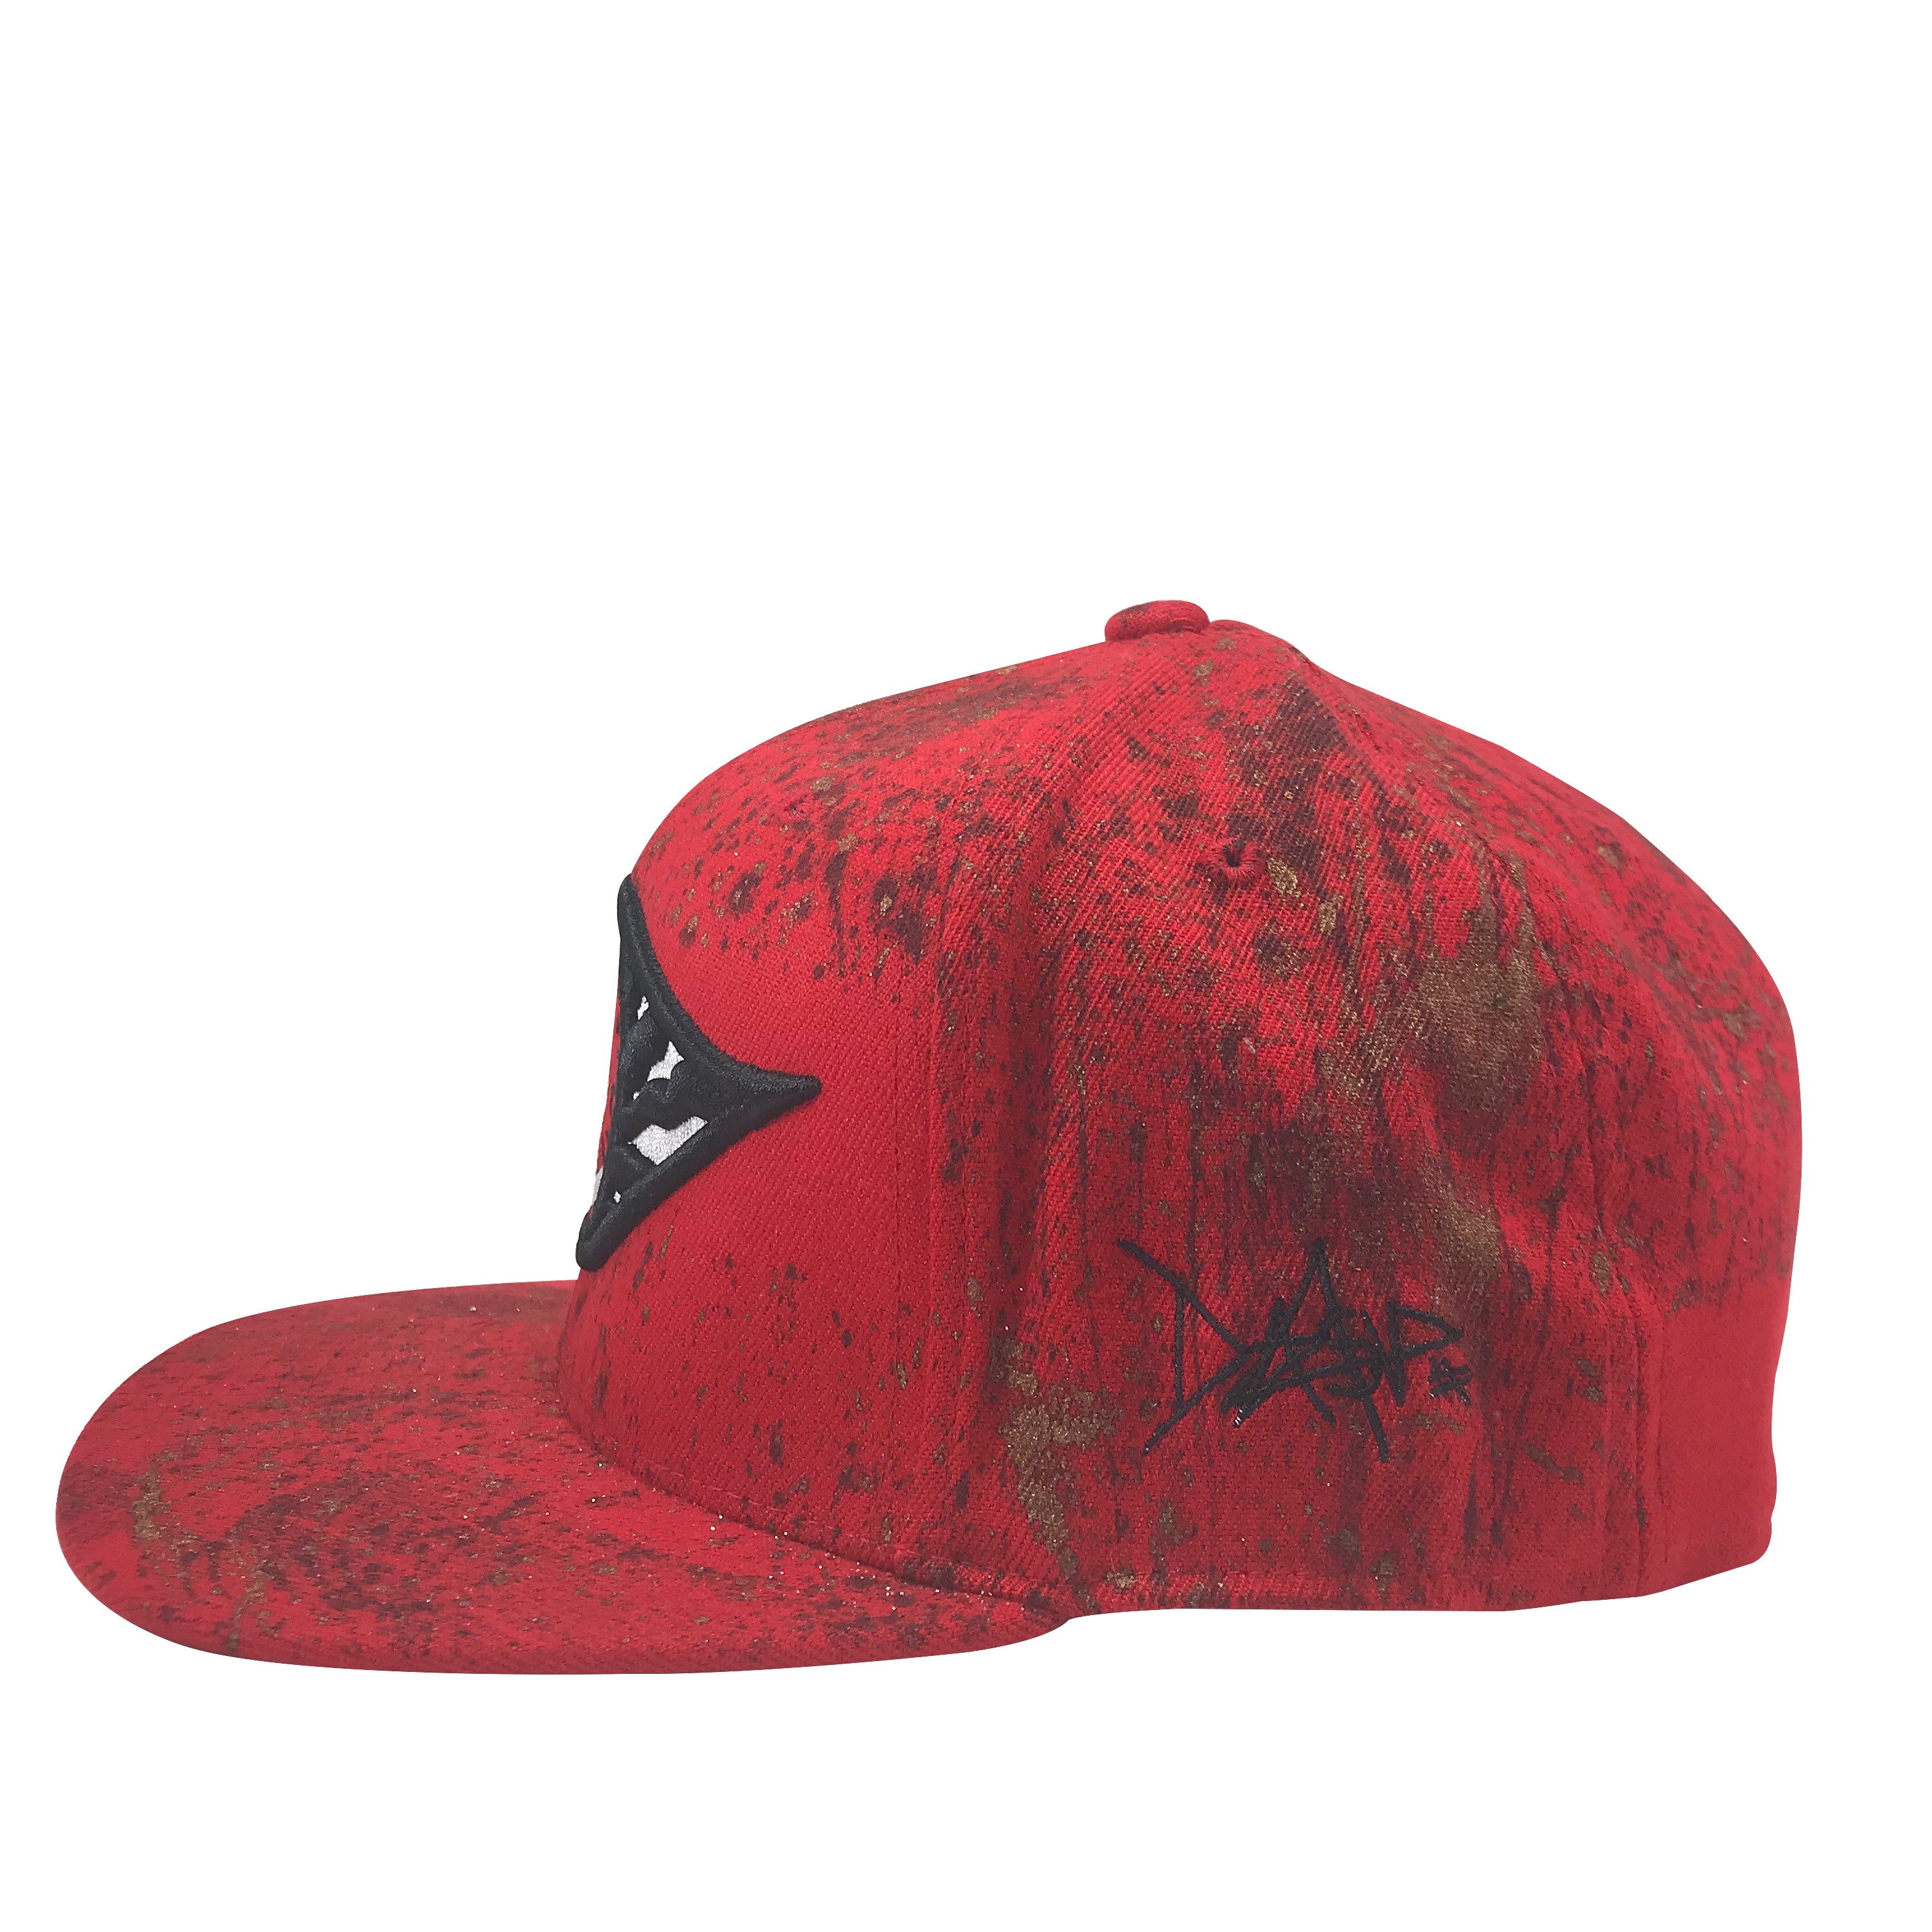 Hat - Unique hand painted / Red- Gold